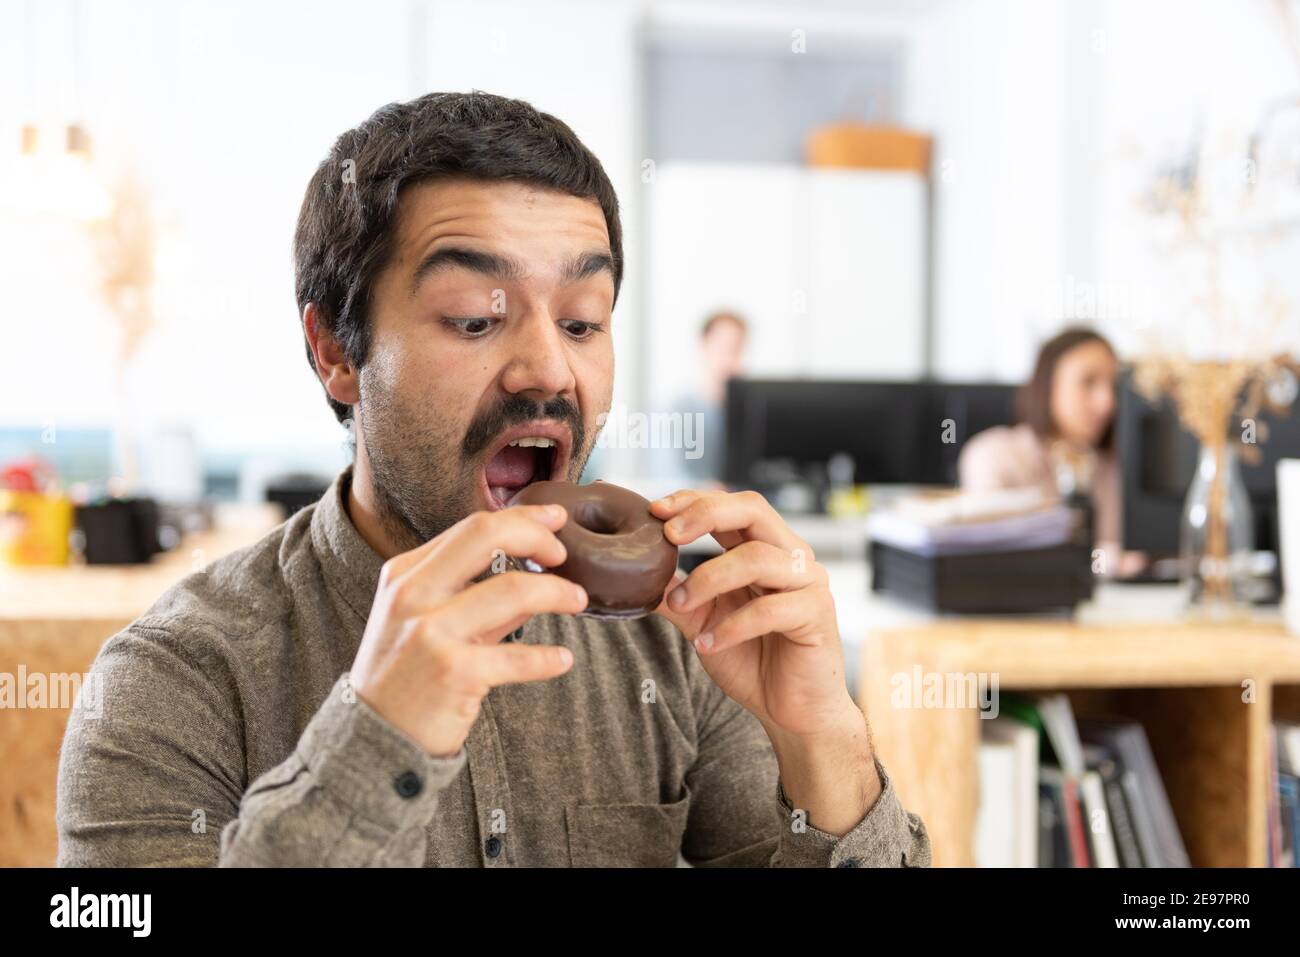 Hispanic man with mustache eating a chocolate sweet bun. Unhealthy habits in the office concept. Stock Photo